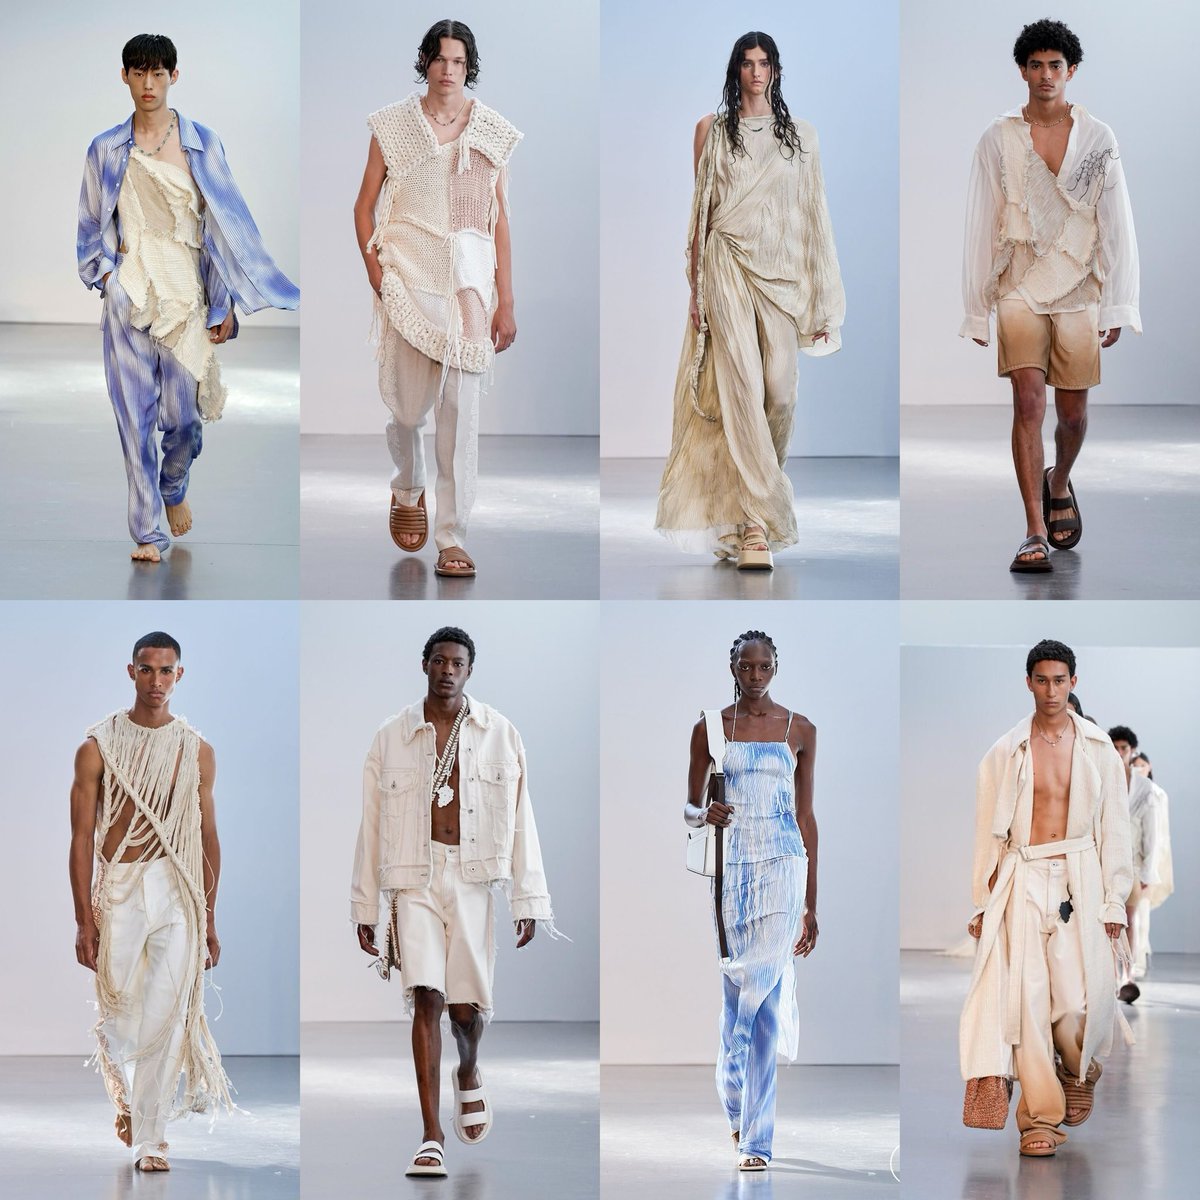 ↳ federico cina ss23

immediately when i came across this collection it was perfection. 

from the beachy colour scheme to the flowing fabrics and unique cuts i thought it would be perfect for any “ocean” inspired scenes and look absolutely whimsical.

love the knits & draping.